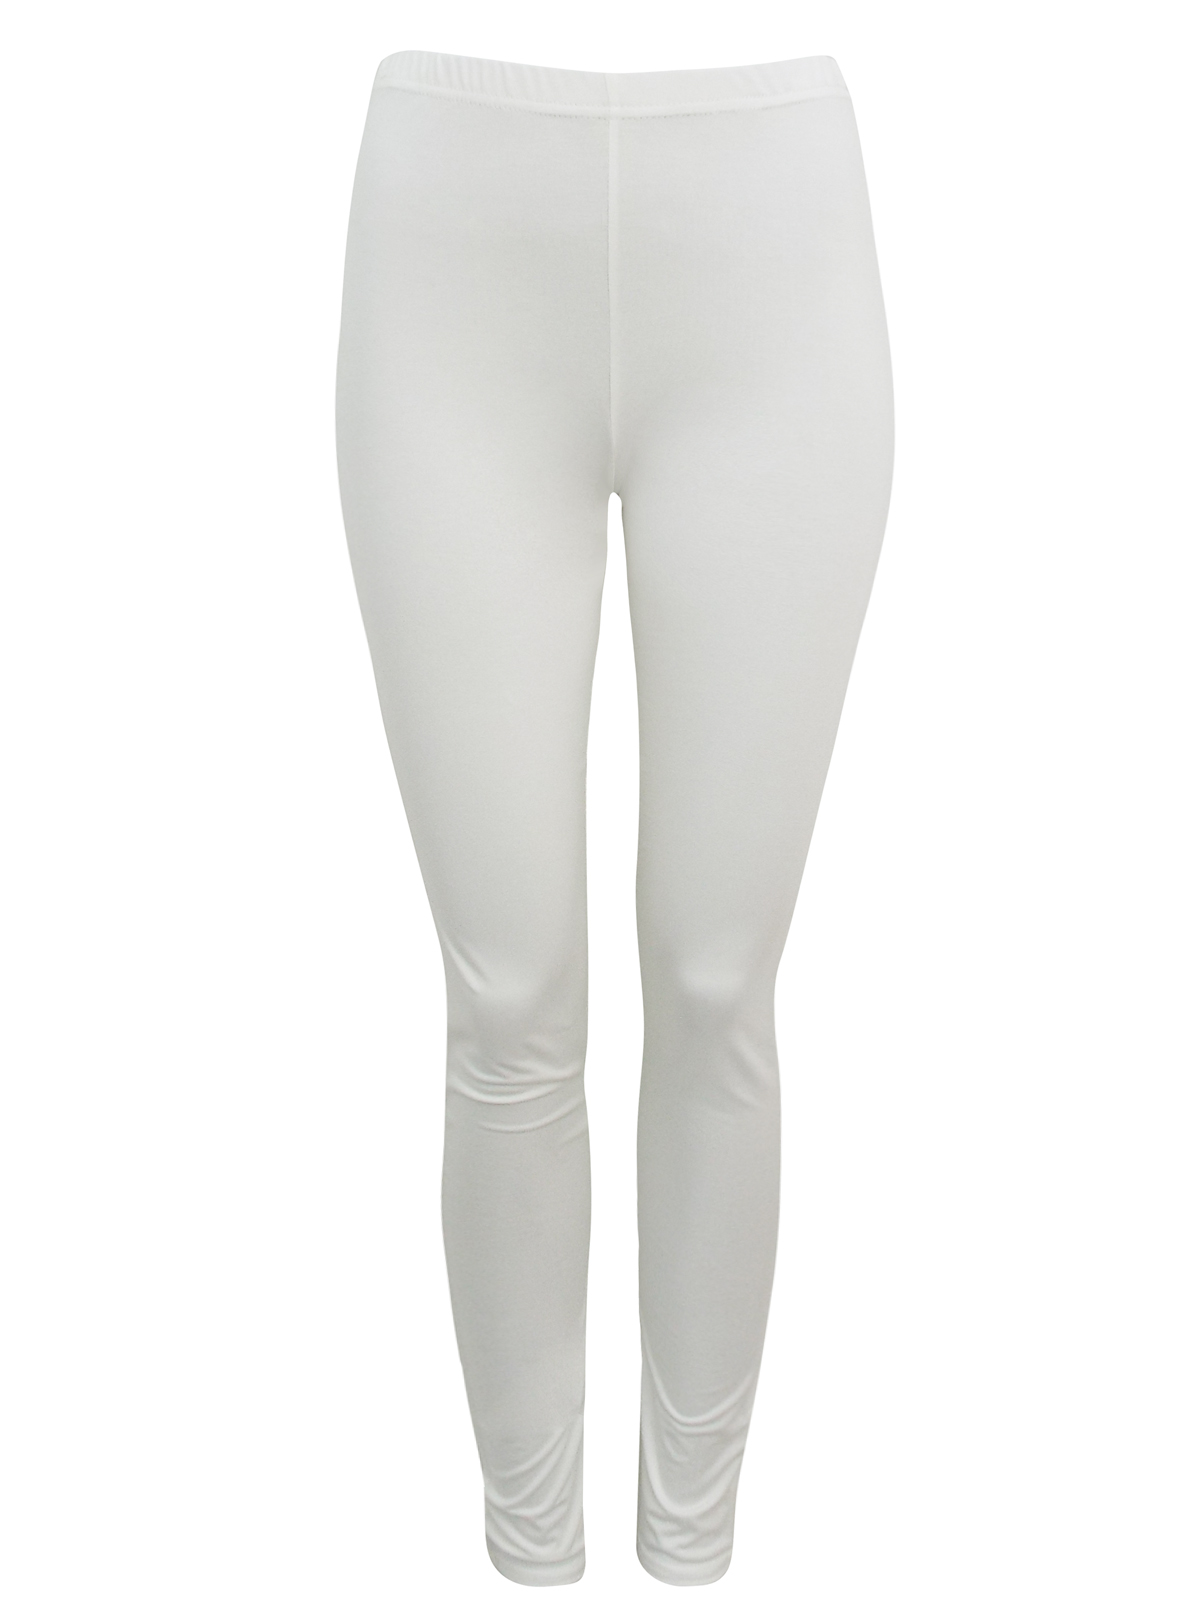 //text.. - - CREAM Full Length Jersey Leggings - Size 10 to 20